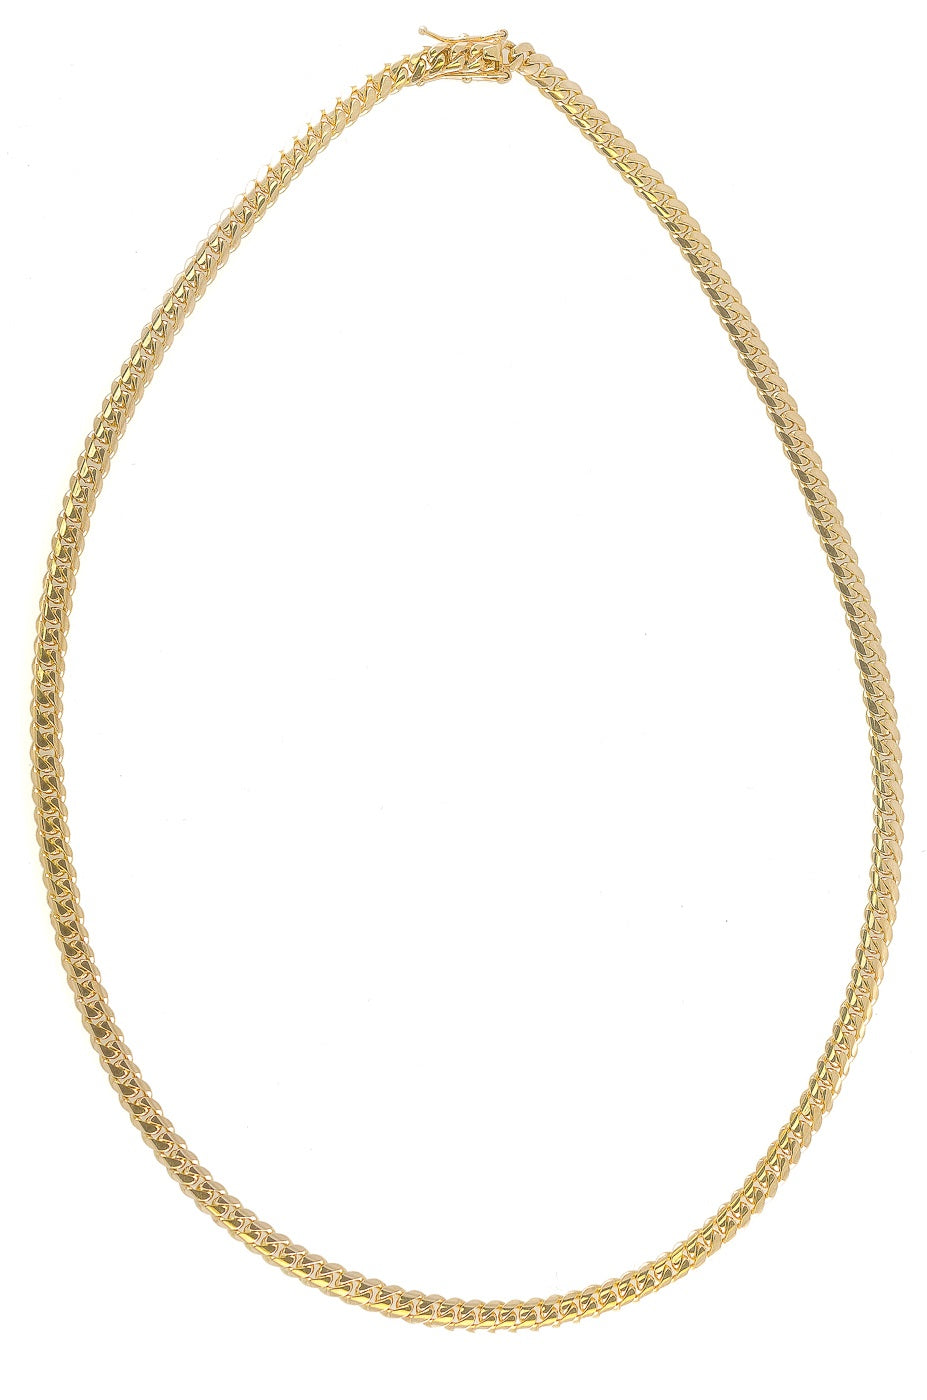 Miami Cuban Link Chain in 14K Yellow & White Gold, 24”